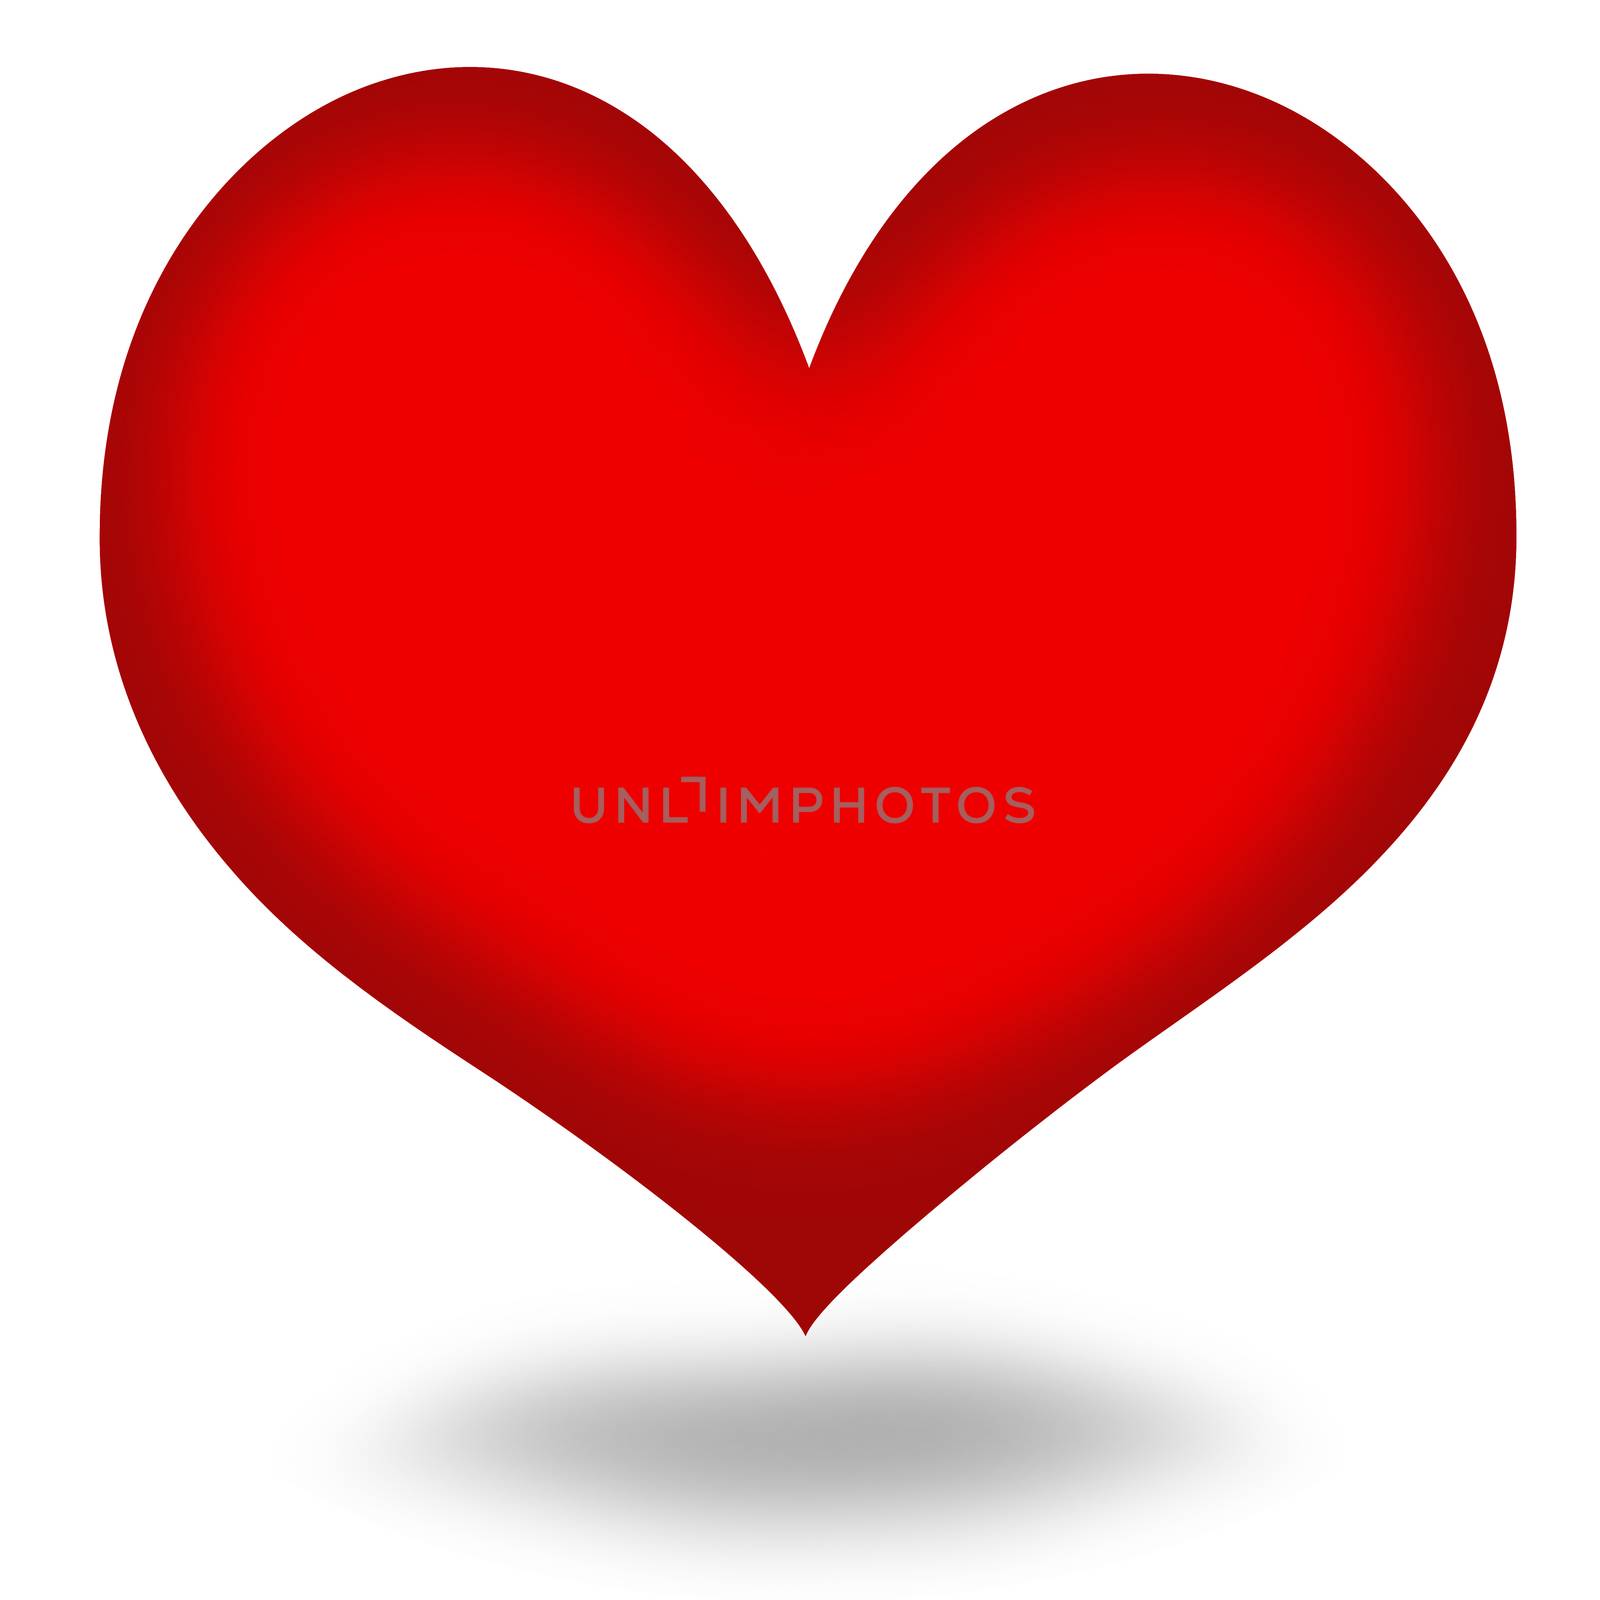 Red heart on white background.